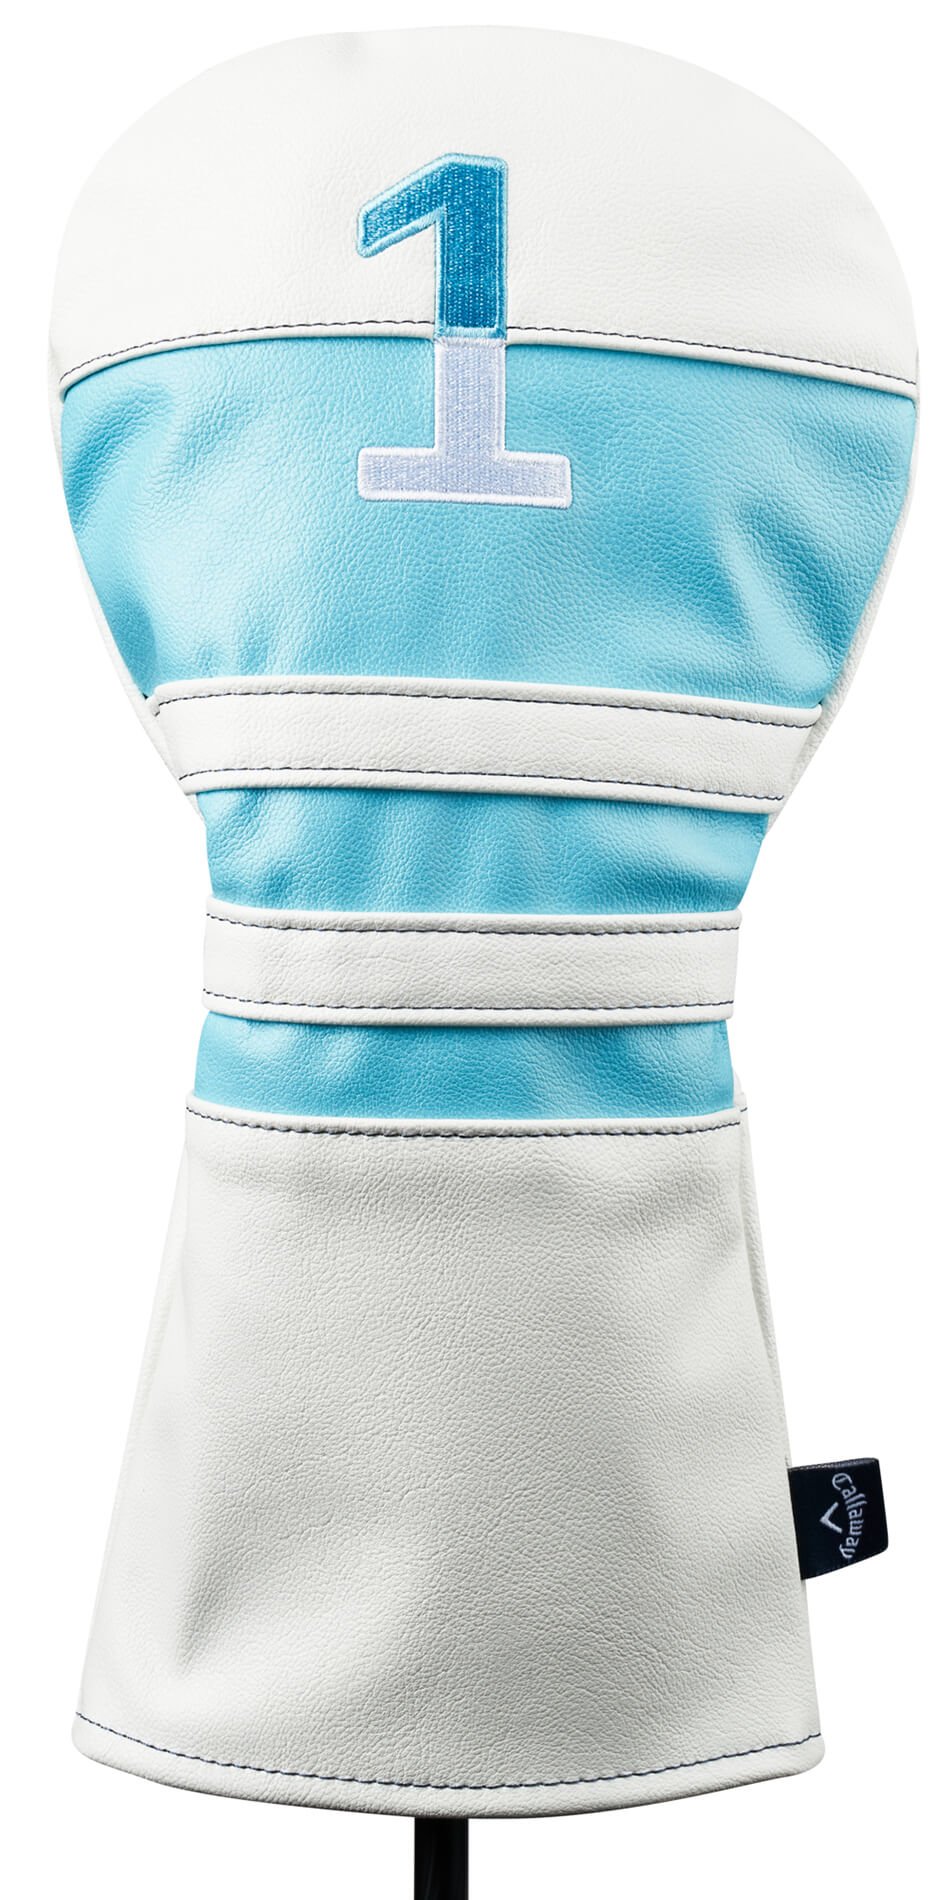 Save 26% on Callaway Golf Vintage Driver Headcover In White/light Blue/navy